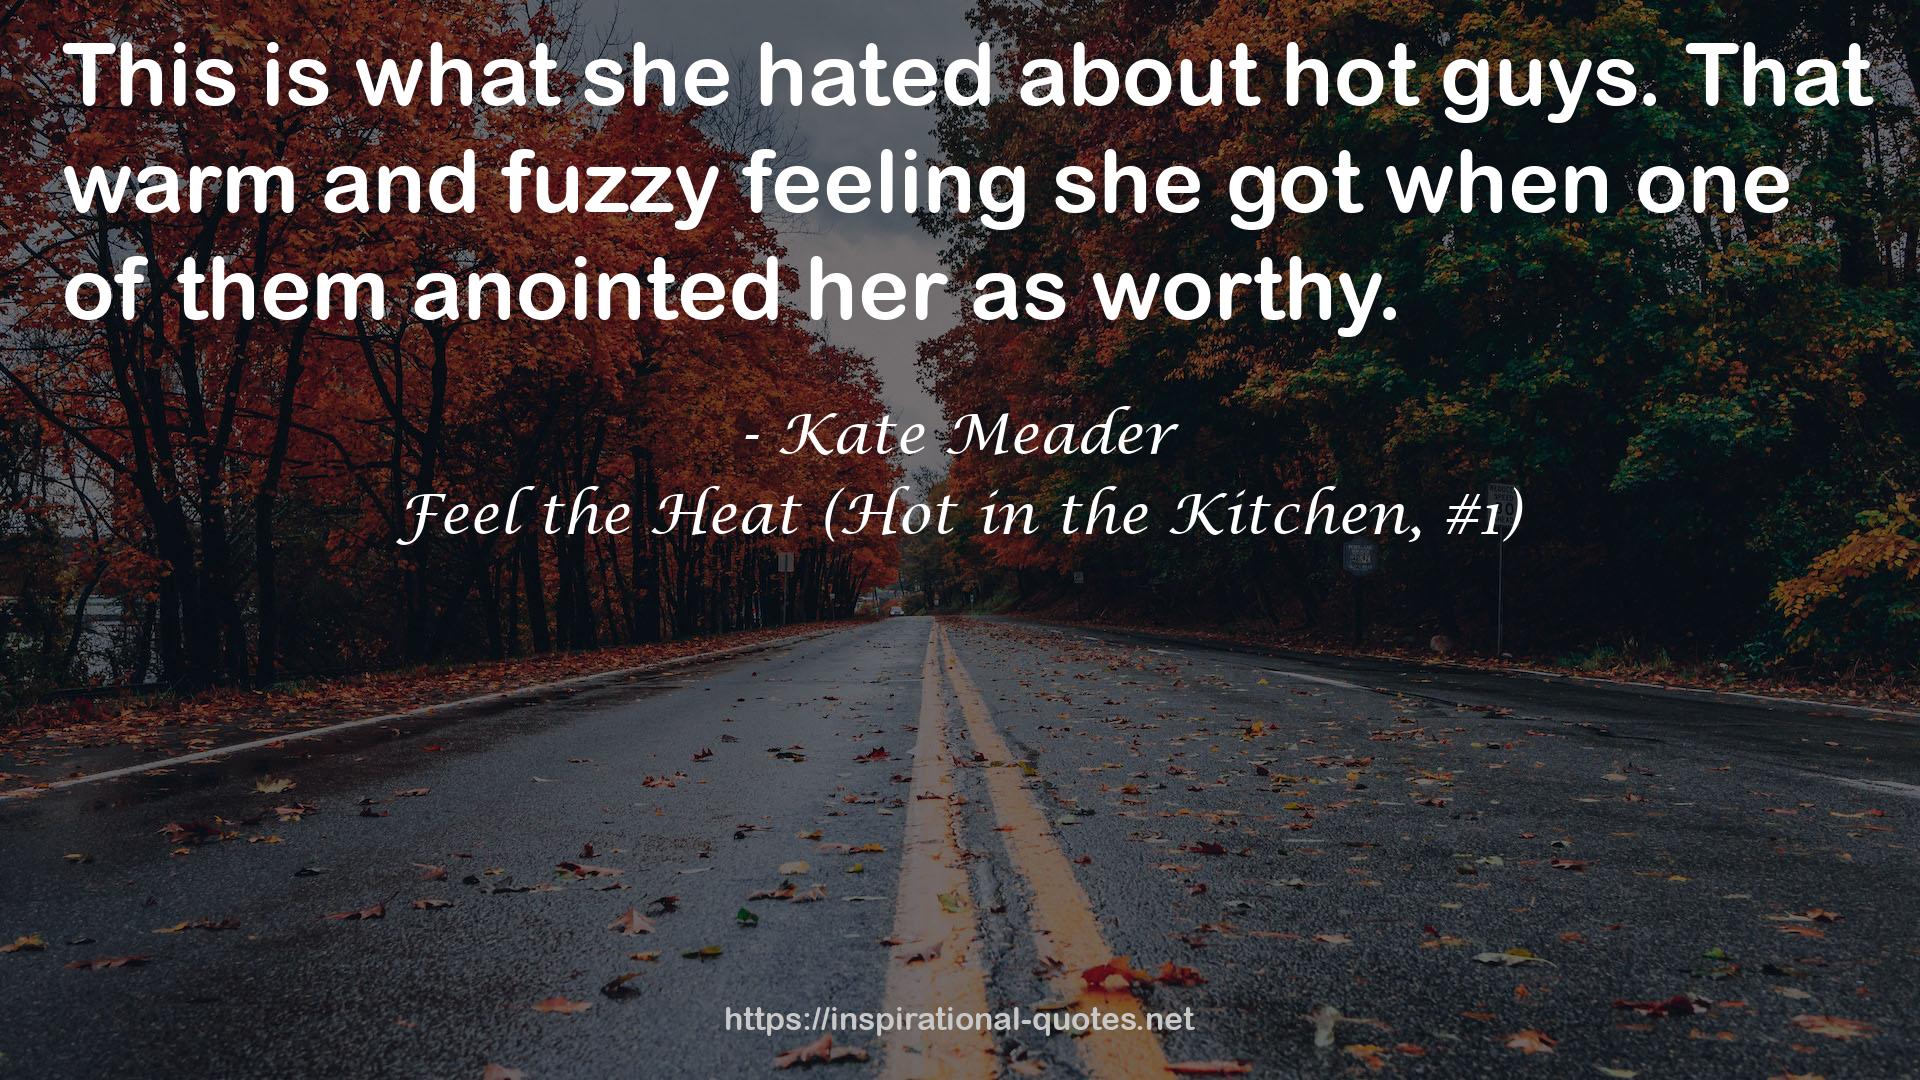 Feel the Heat (Hot in the Kitchen, #1) QUOTES